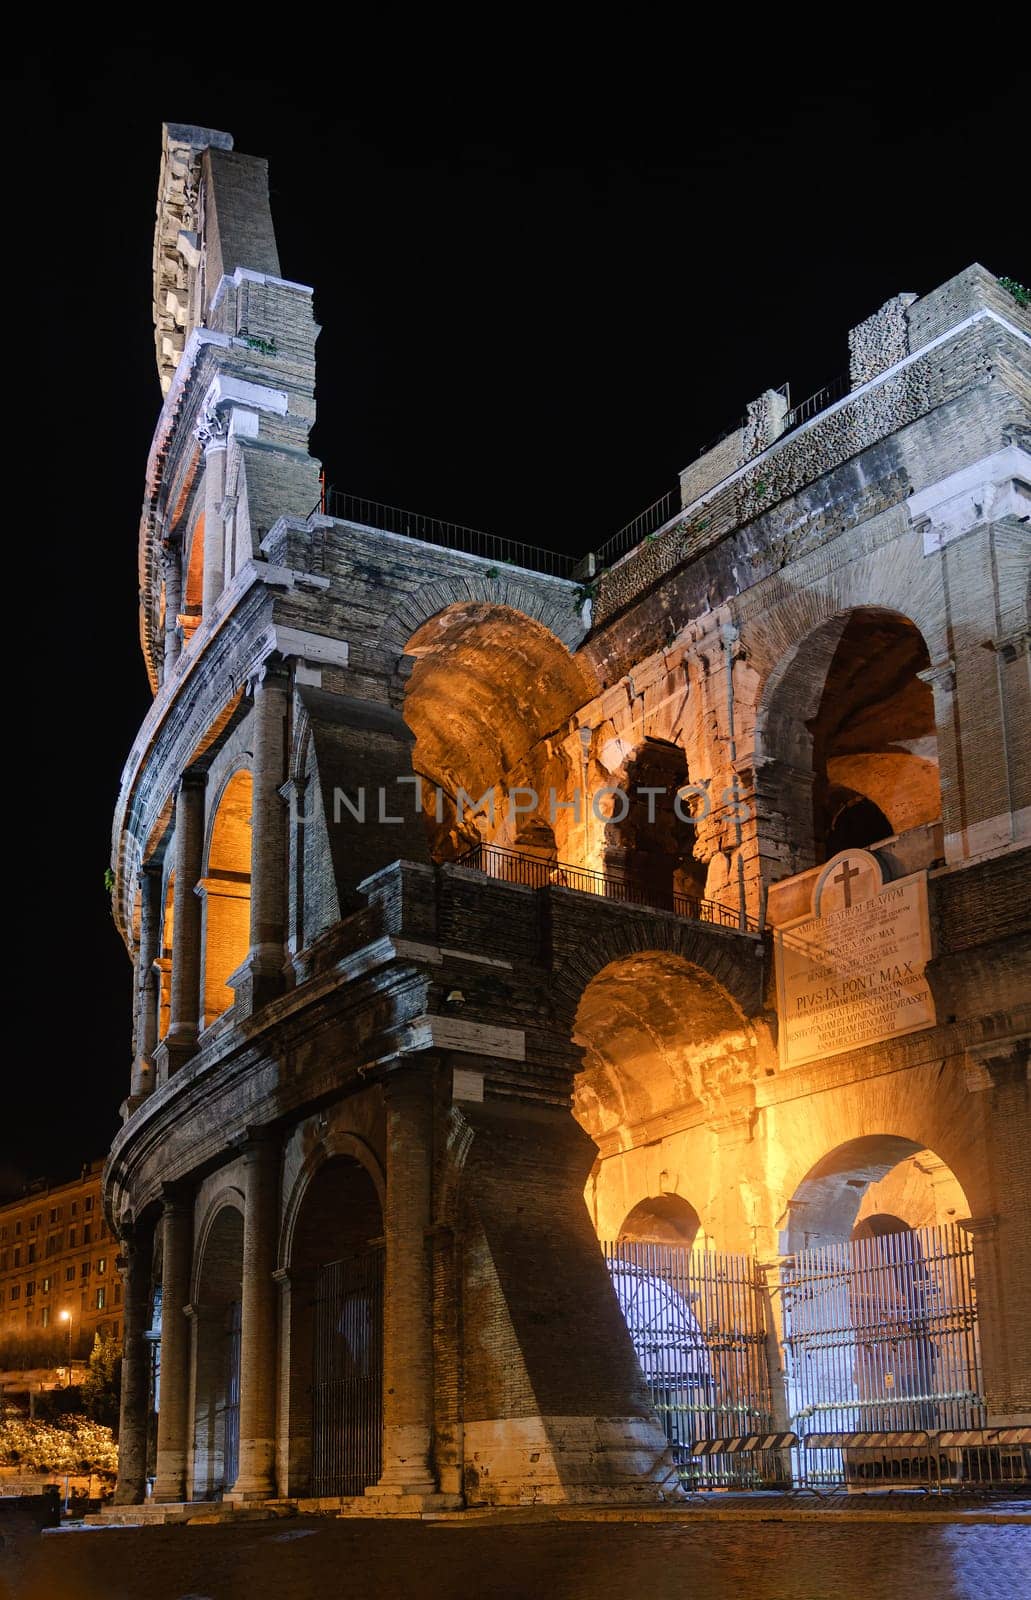 Vertical view of Colosseum in Rome illuminated at night by ivanmoreno